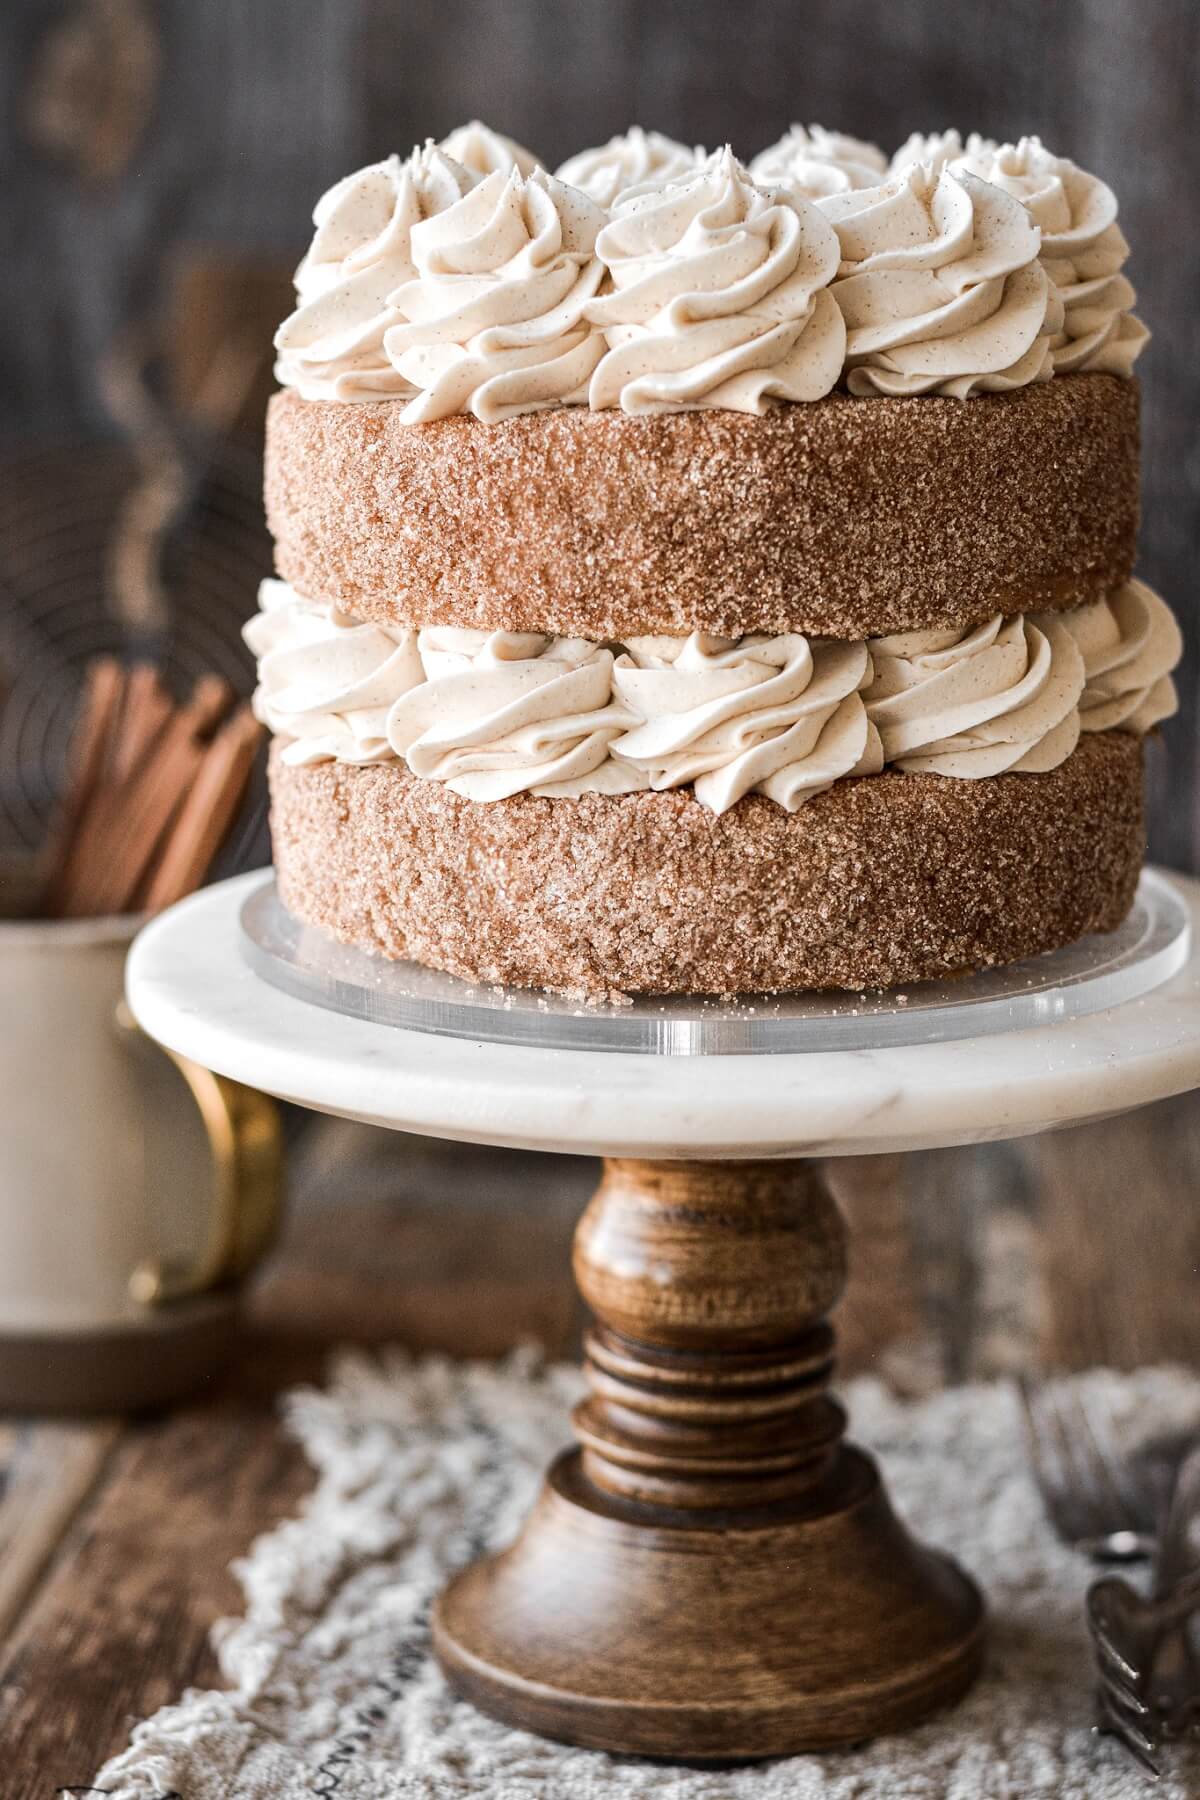 Piped buttercream between layers of cinnamon cake.